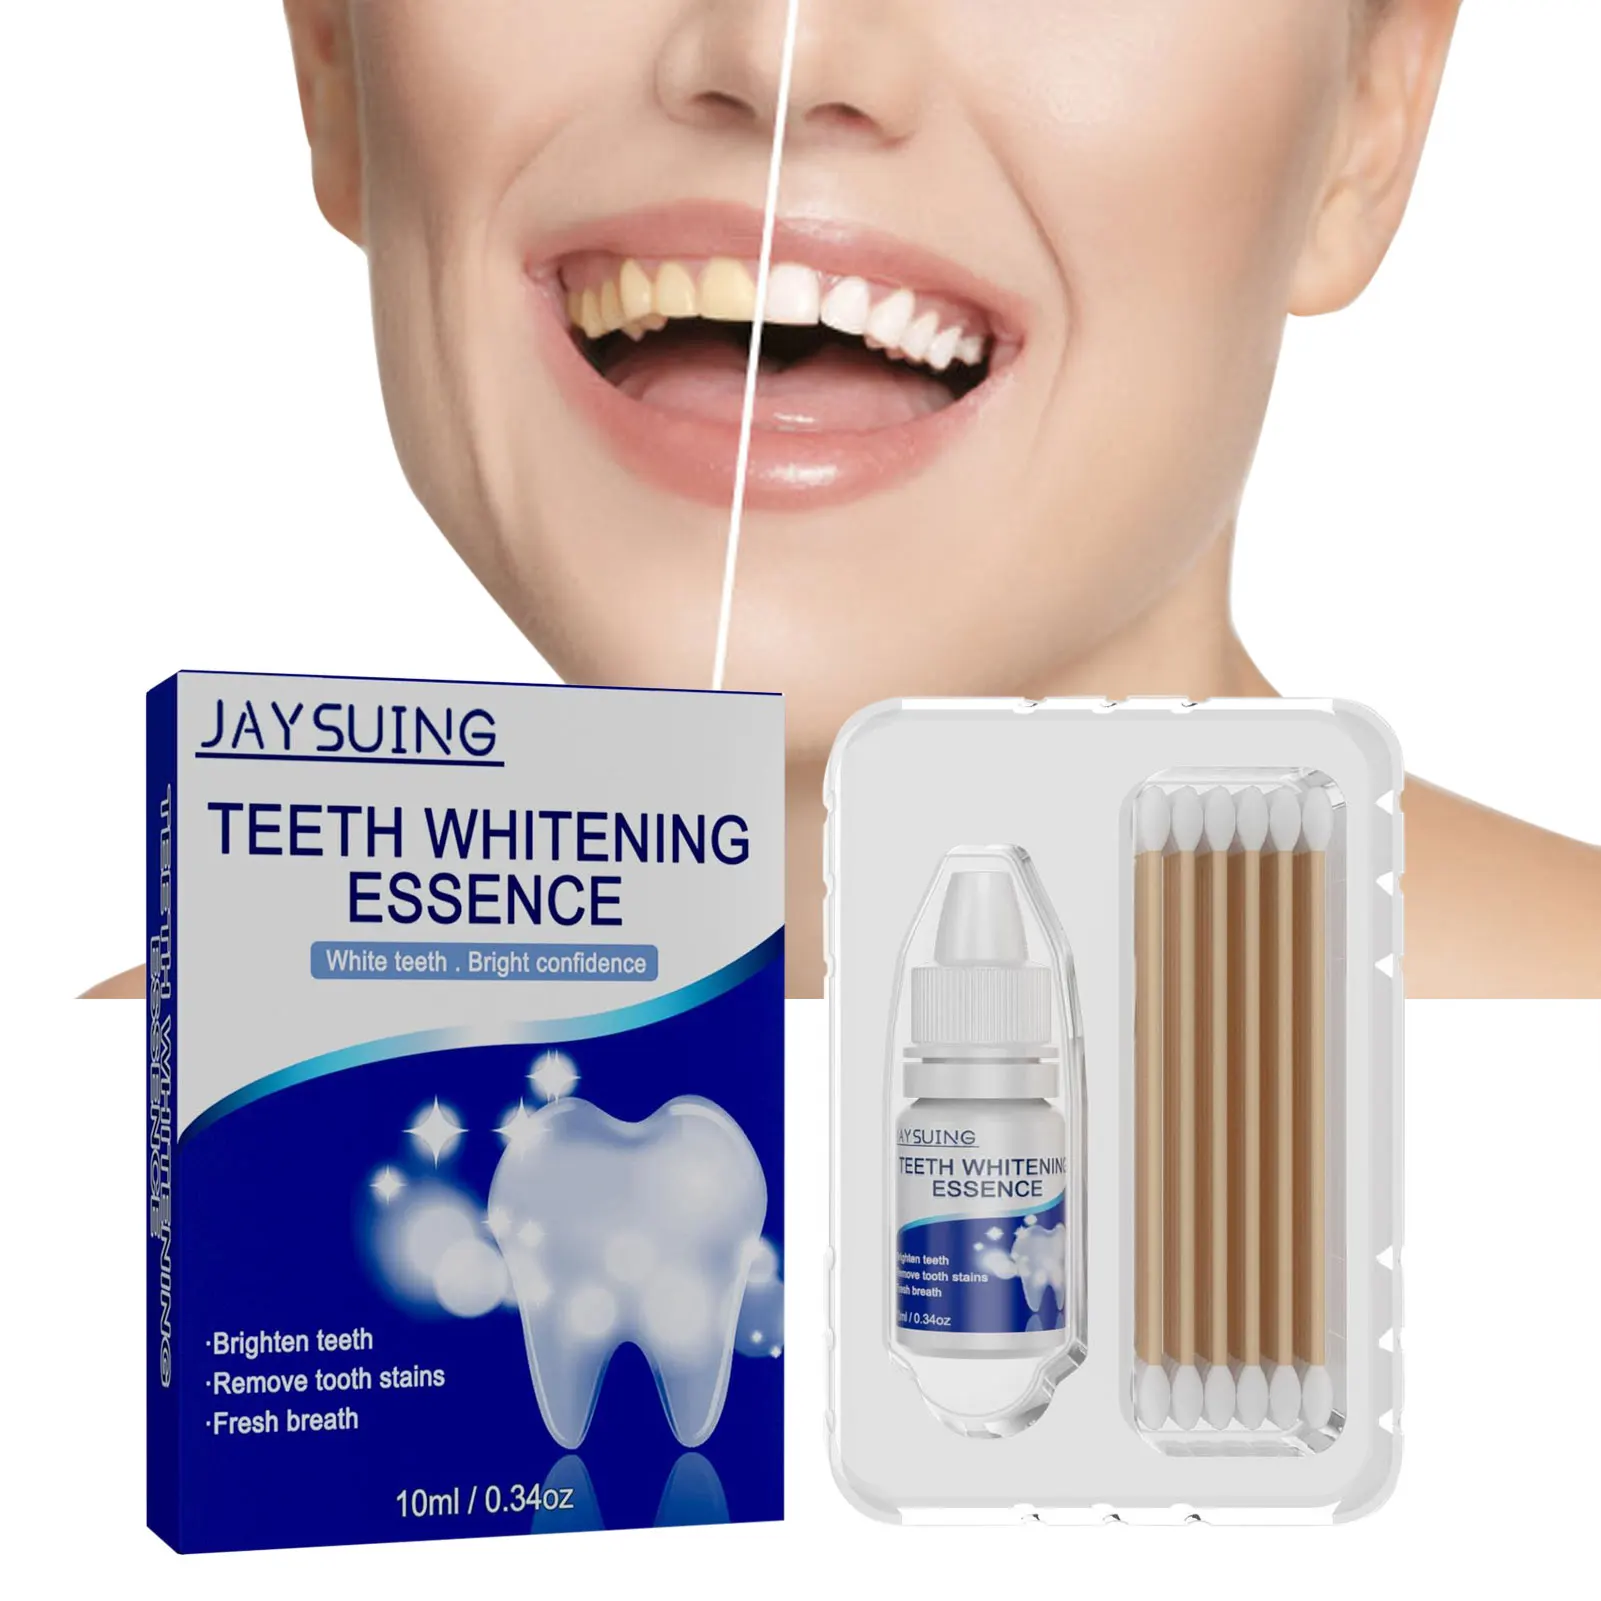 

Teeth Whitening Serum Dental Whitener Bleach Serum With Cotton Swabs Tooth Serum Removes Plaque Stains Dentistry Bleaching Care